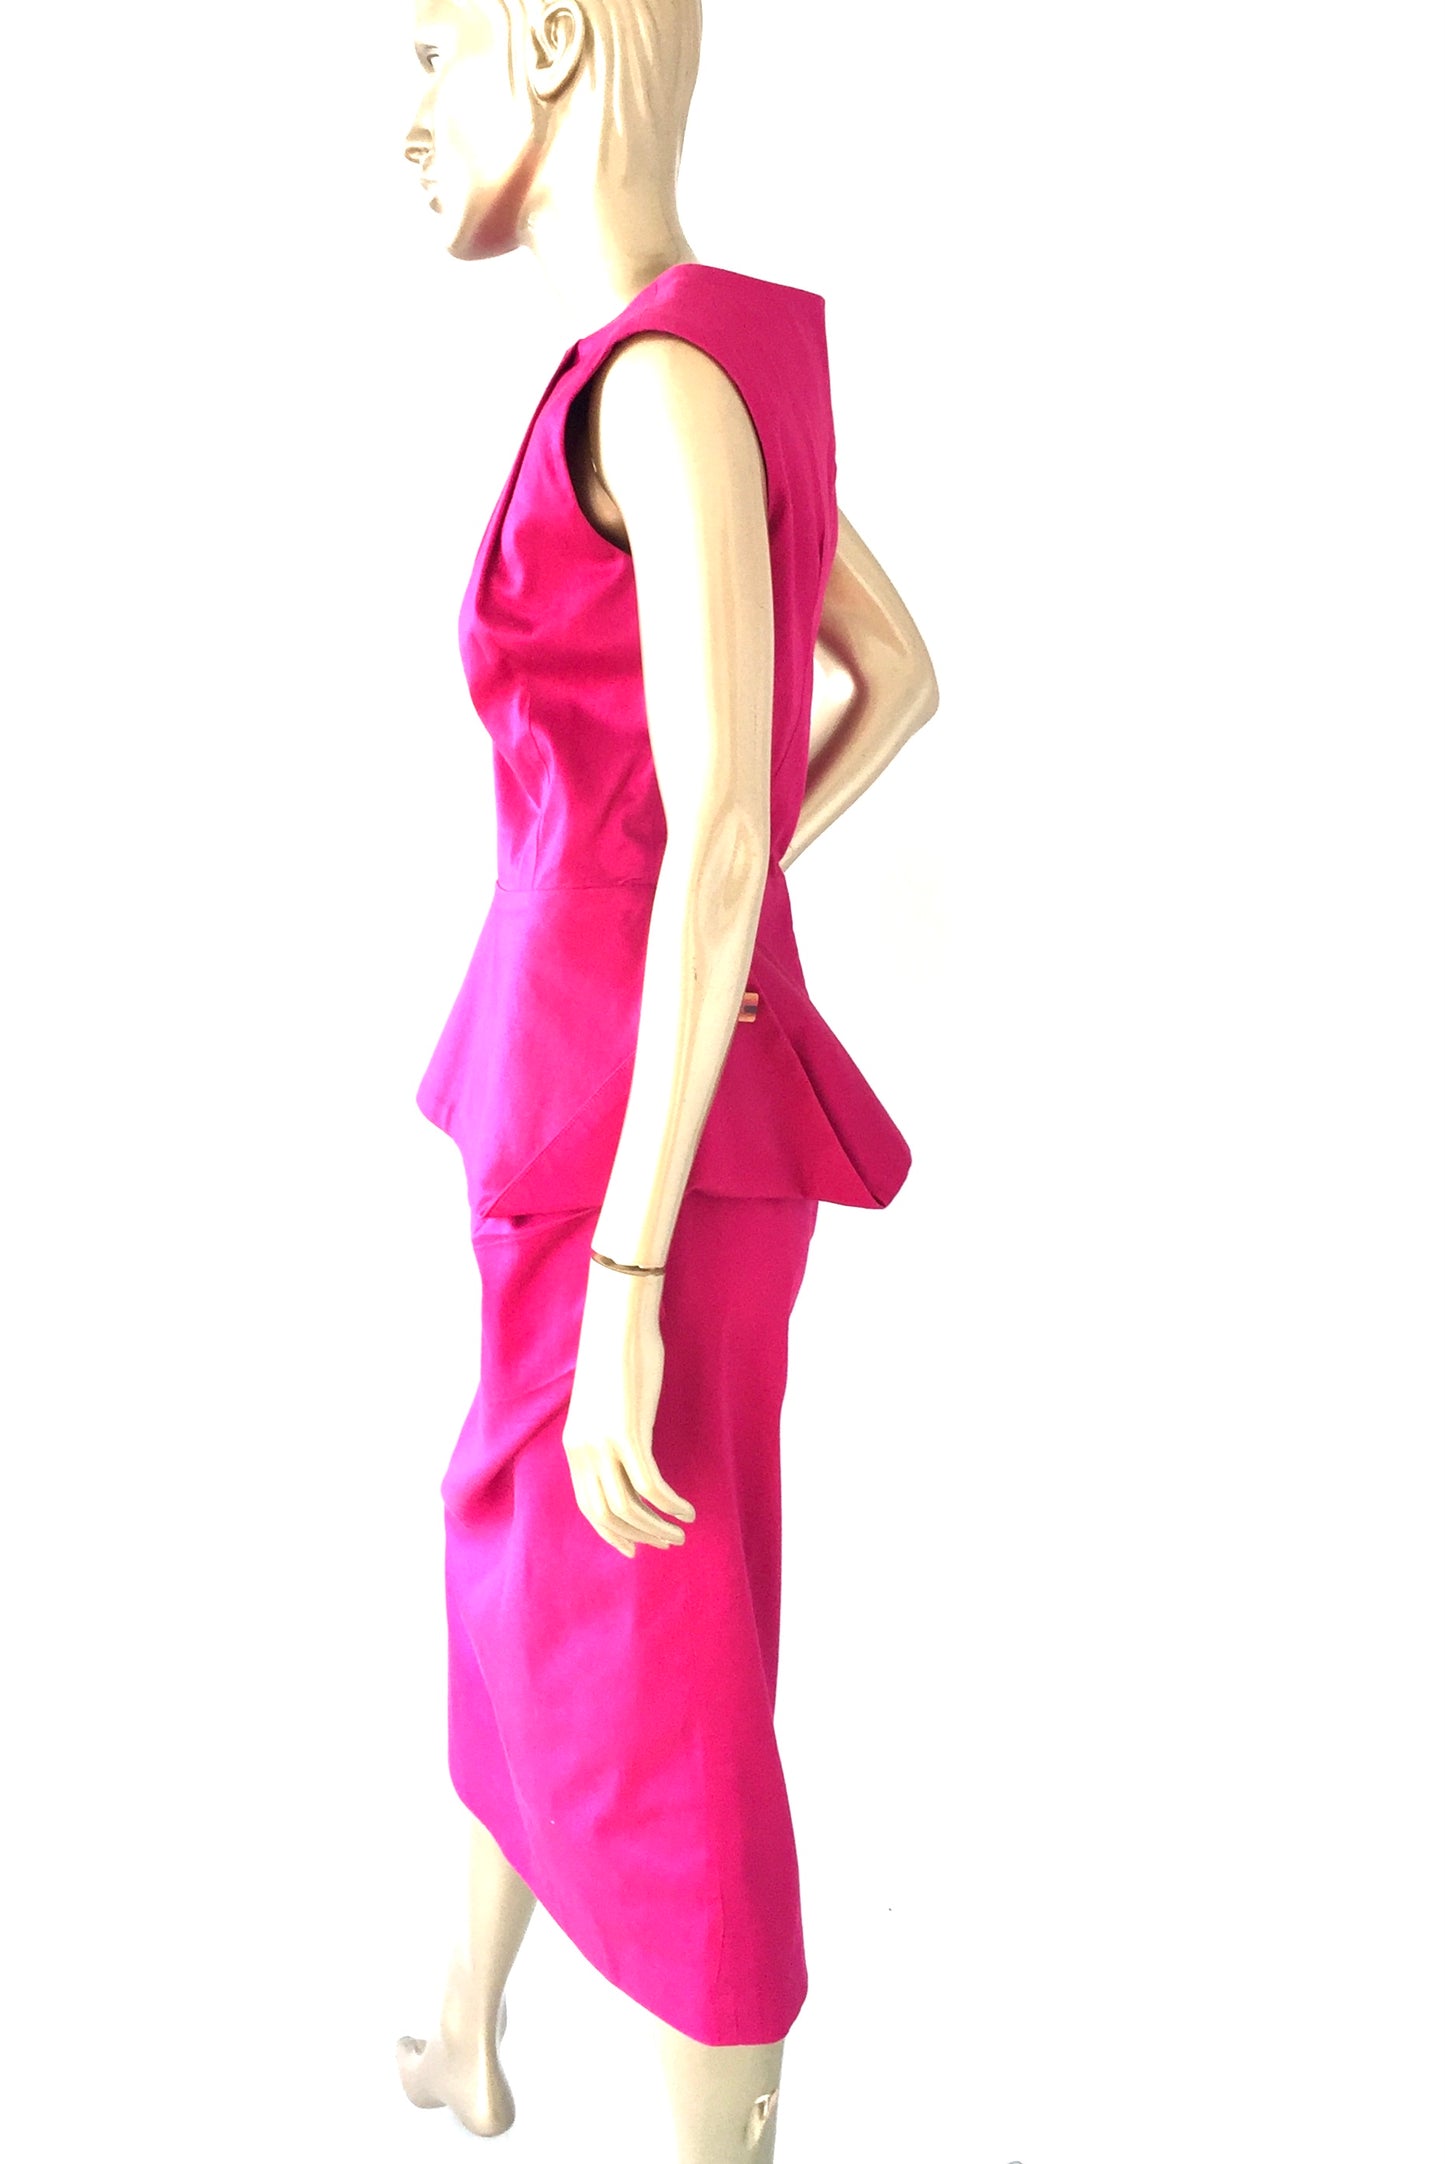 Pencil style skirt with pleats & Peplum style top in hot pink colour.